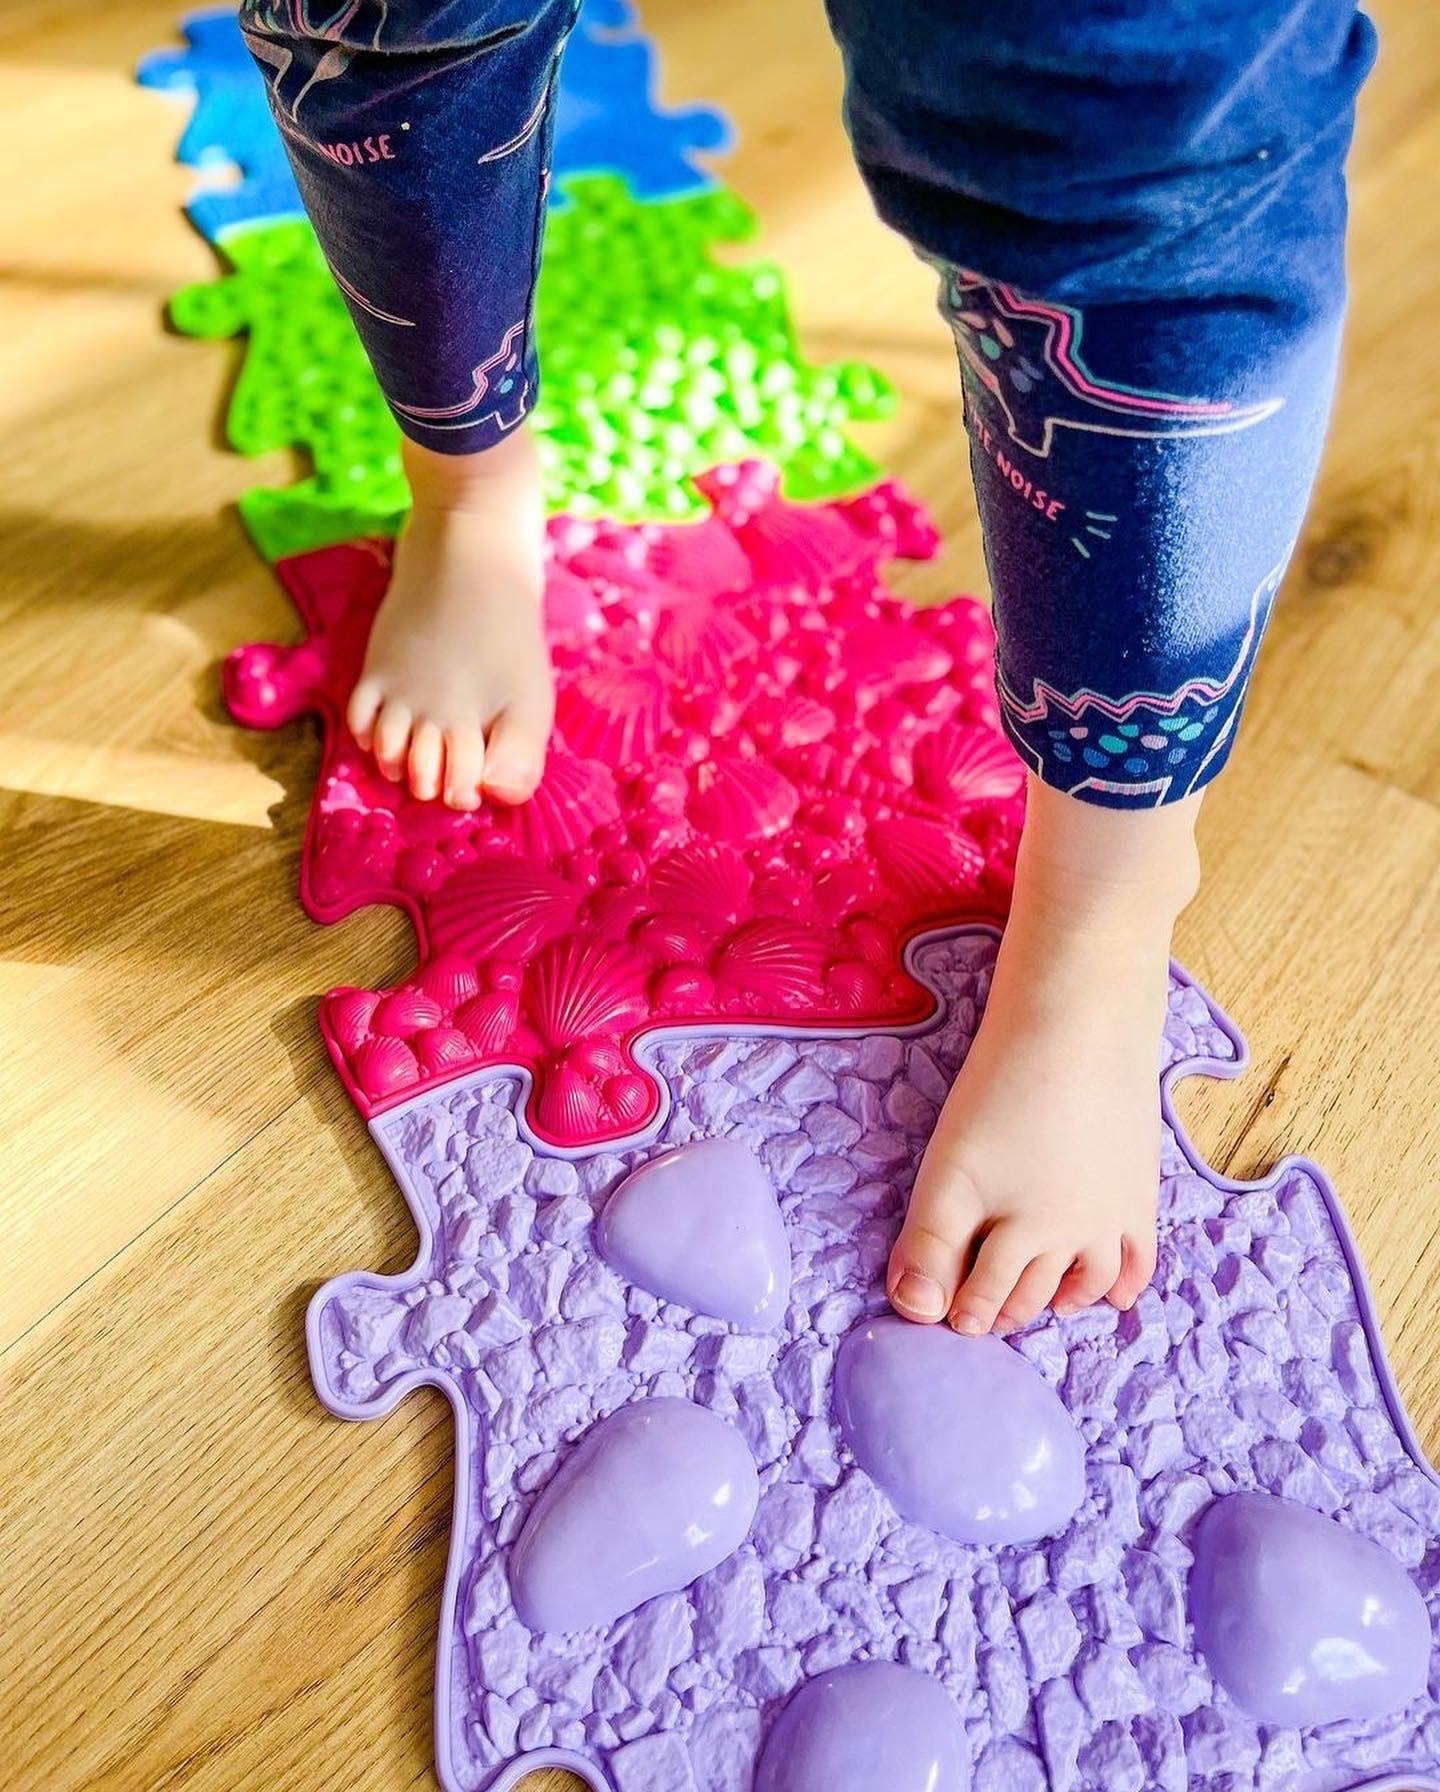 barefoot walking with textured mats recommended by therapist and health professionals